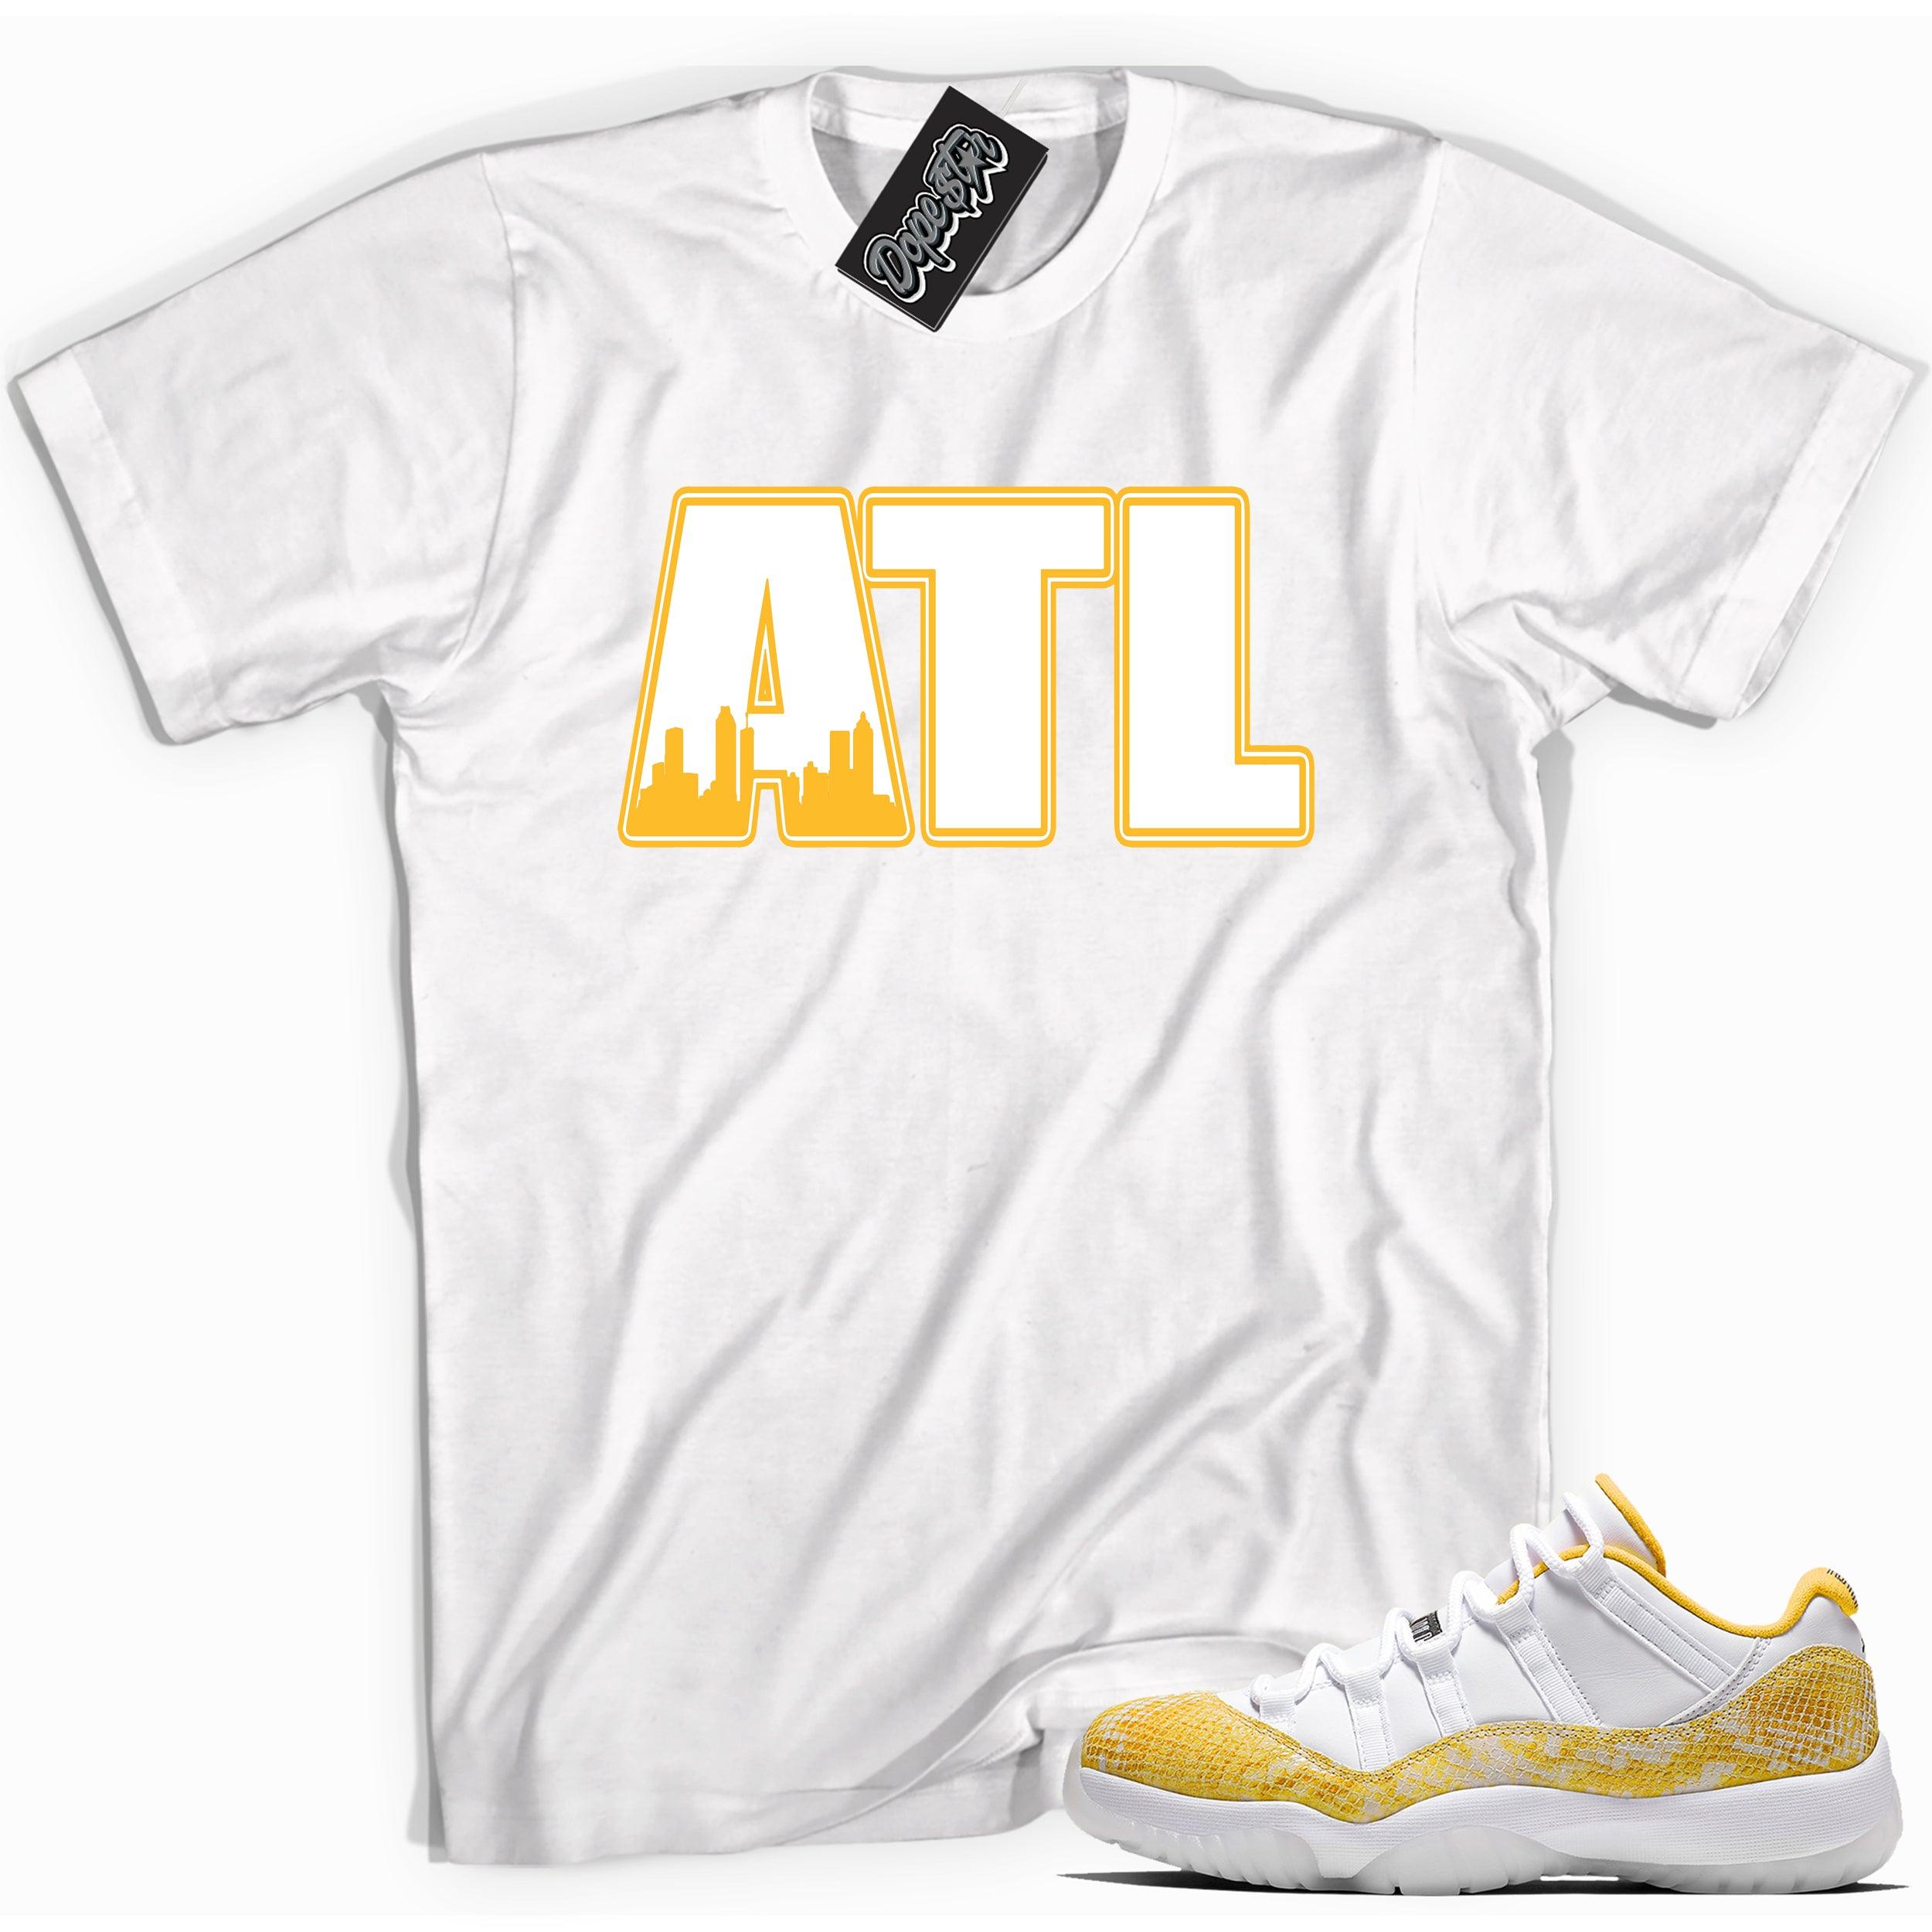 Cool white graphic tee with 'ATL' print, that perfectly matches Air Jordan 11 Retro Low Yellow Snakeskin sneakers